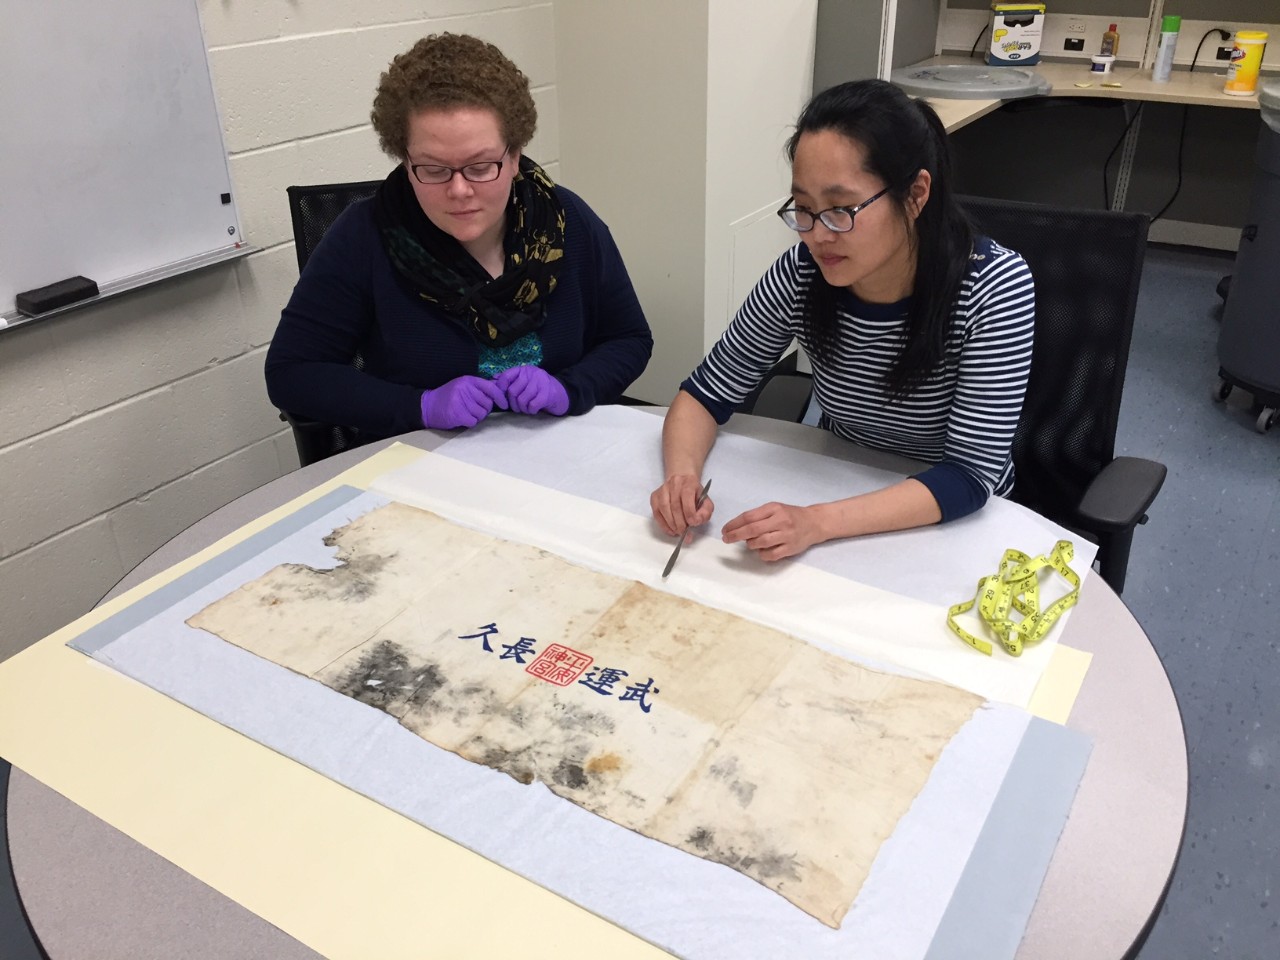 Two conservators examine a Japanese prayer towel.